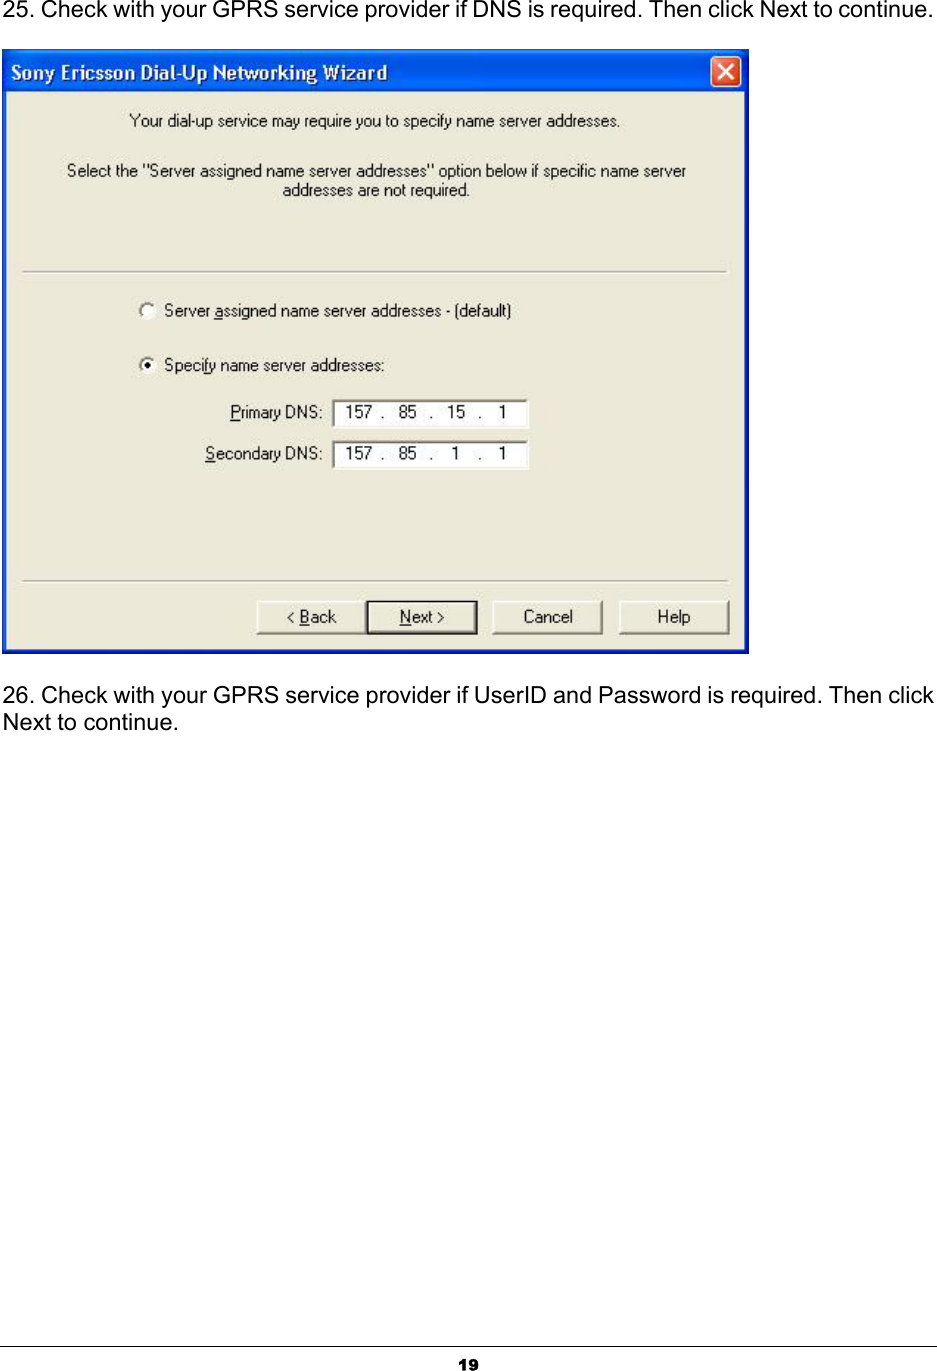  1925. Check with your GPRS service provider if DNS is required. Then click Next to continue.    26. Check with your GPRS service provider if UserID and Password is required. Then click Next to continue. 